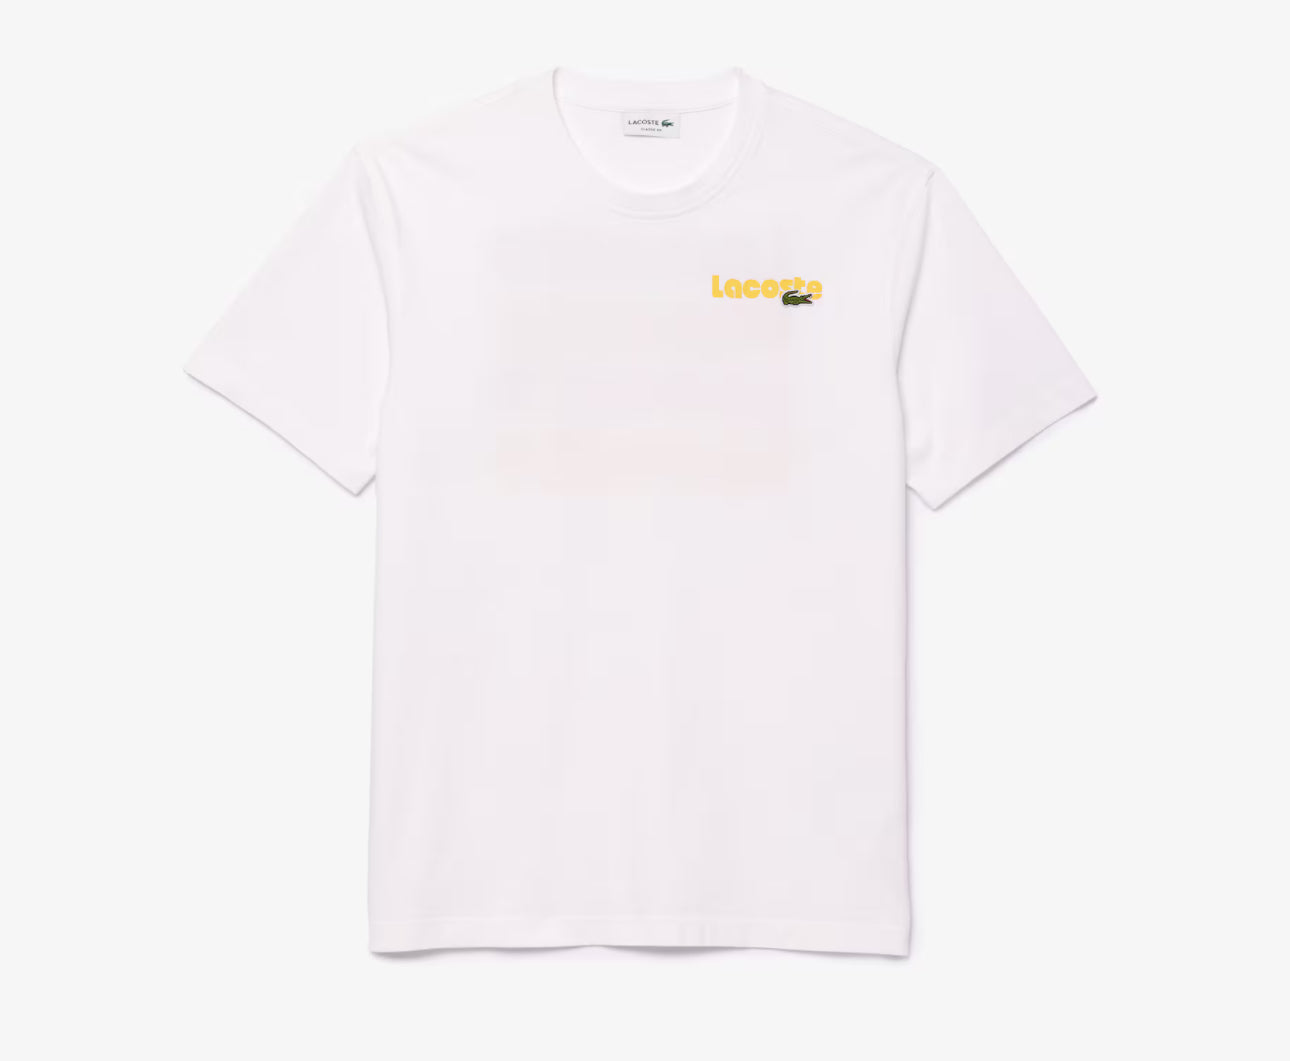 LACOSTS MEN'S WASHED EFFECT WHITE T-SHIRT